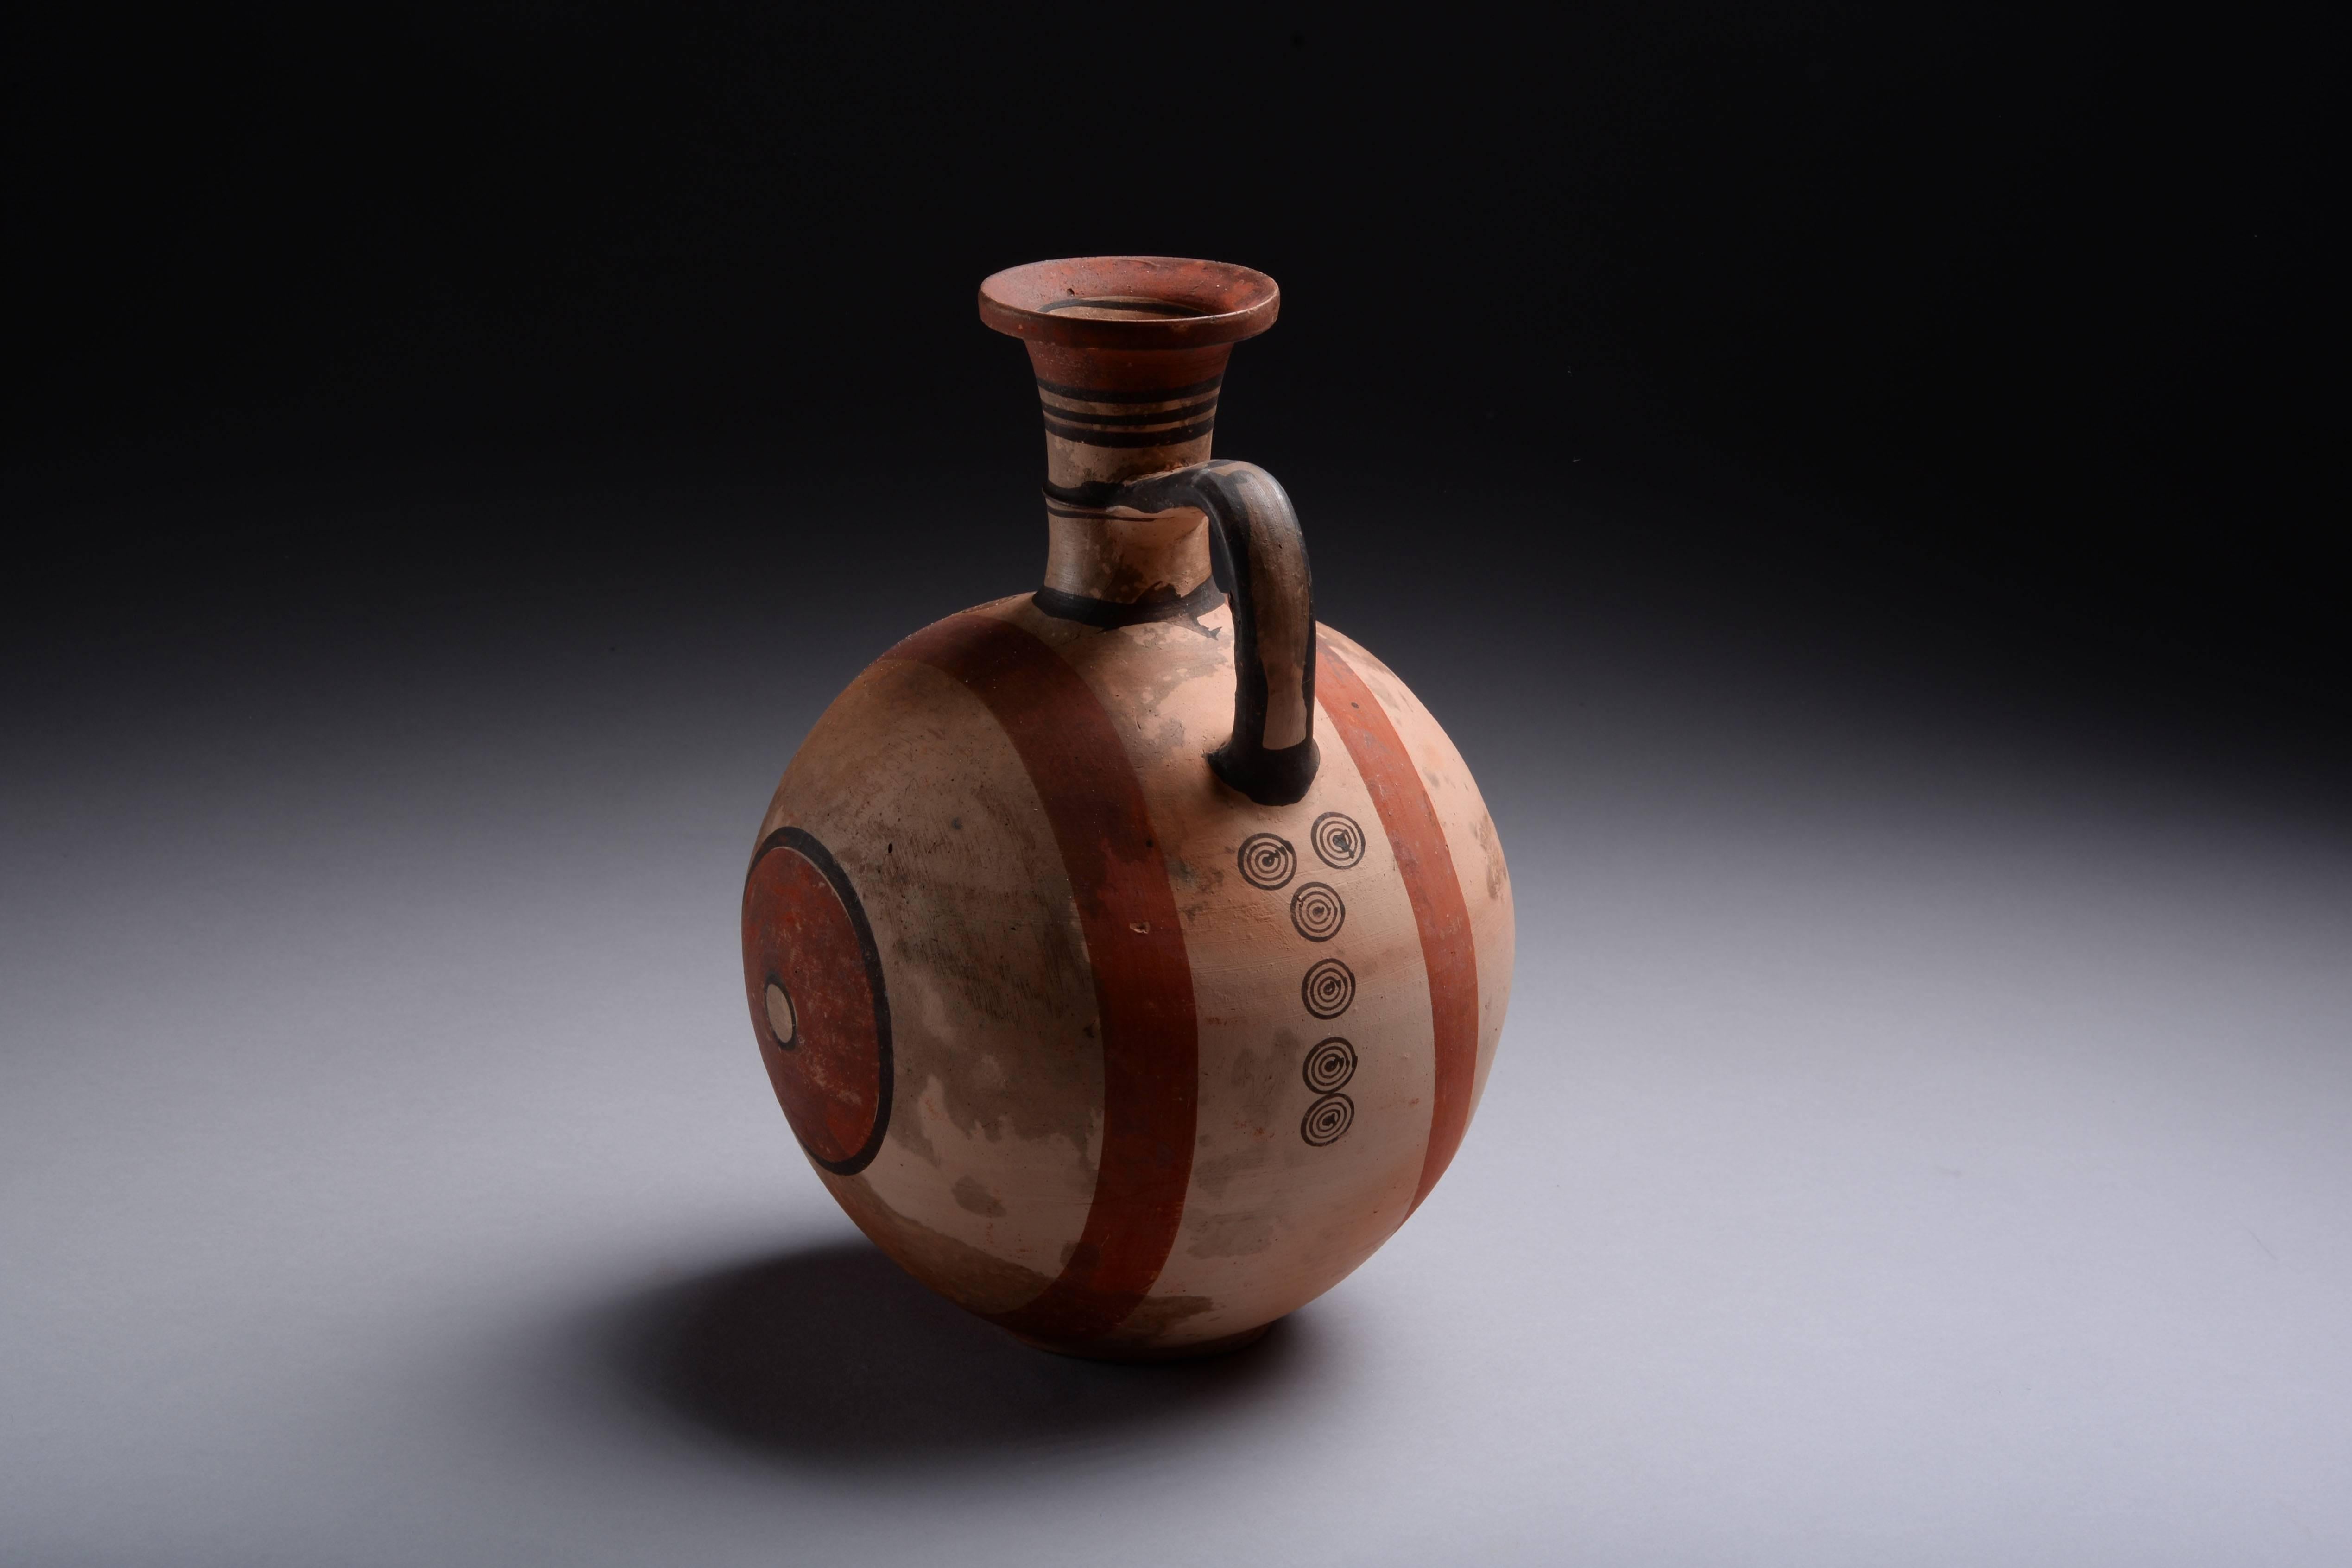 An ancient Cypriot iron age geometric period oinochoe (or wine jug), dating to circa 750-650 BC.

Standing on a ring base with a large, round body, cylindrical flaring neck, splayed mouth and loop handle. Decorated throughout with bands and